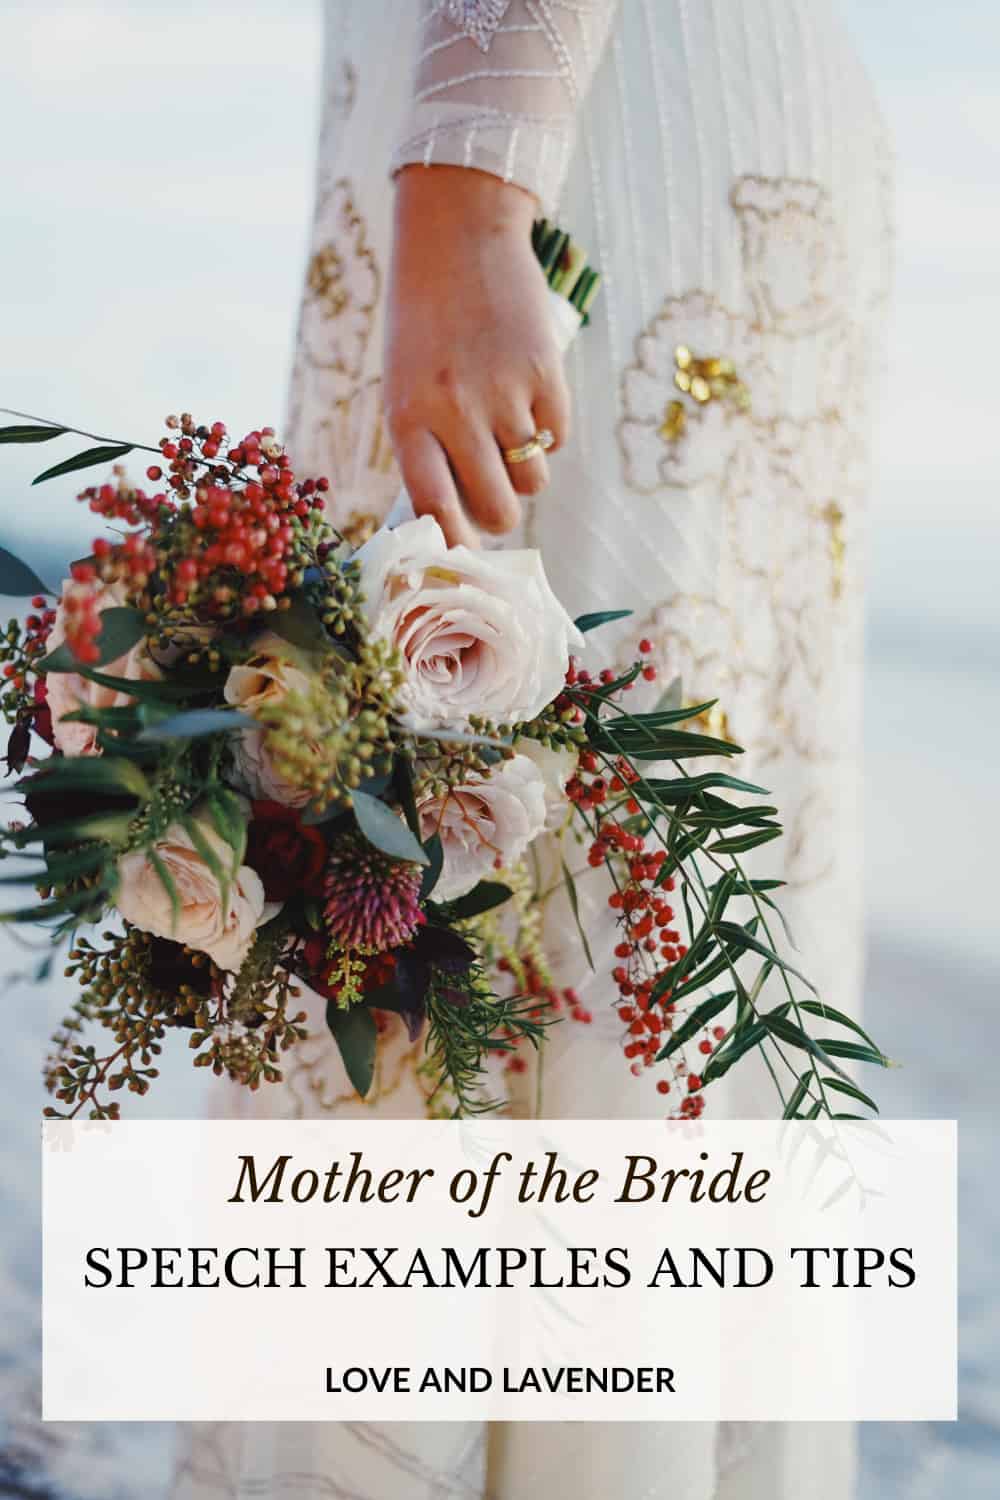 Delivering An Amazing Mother-of-the-Bride Speech - Pinterest pin